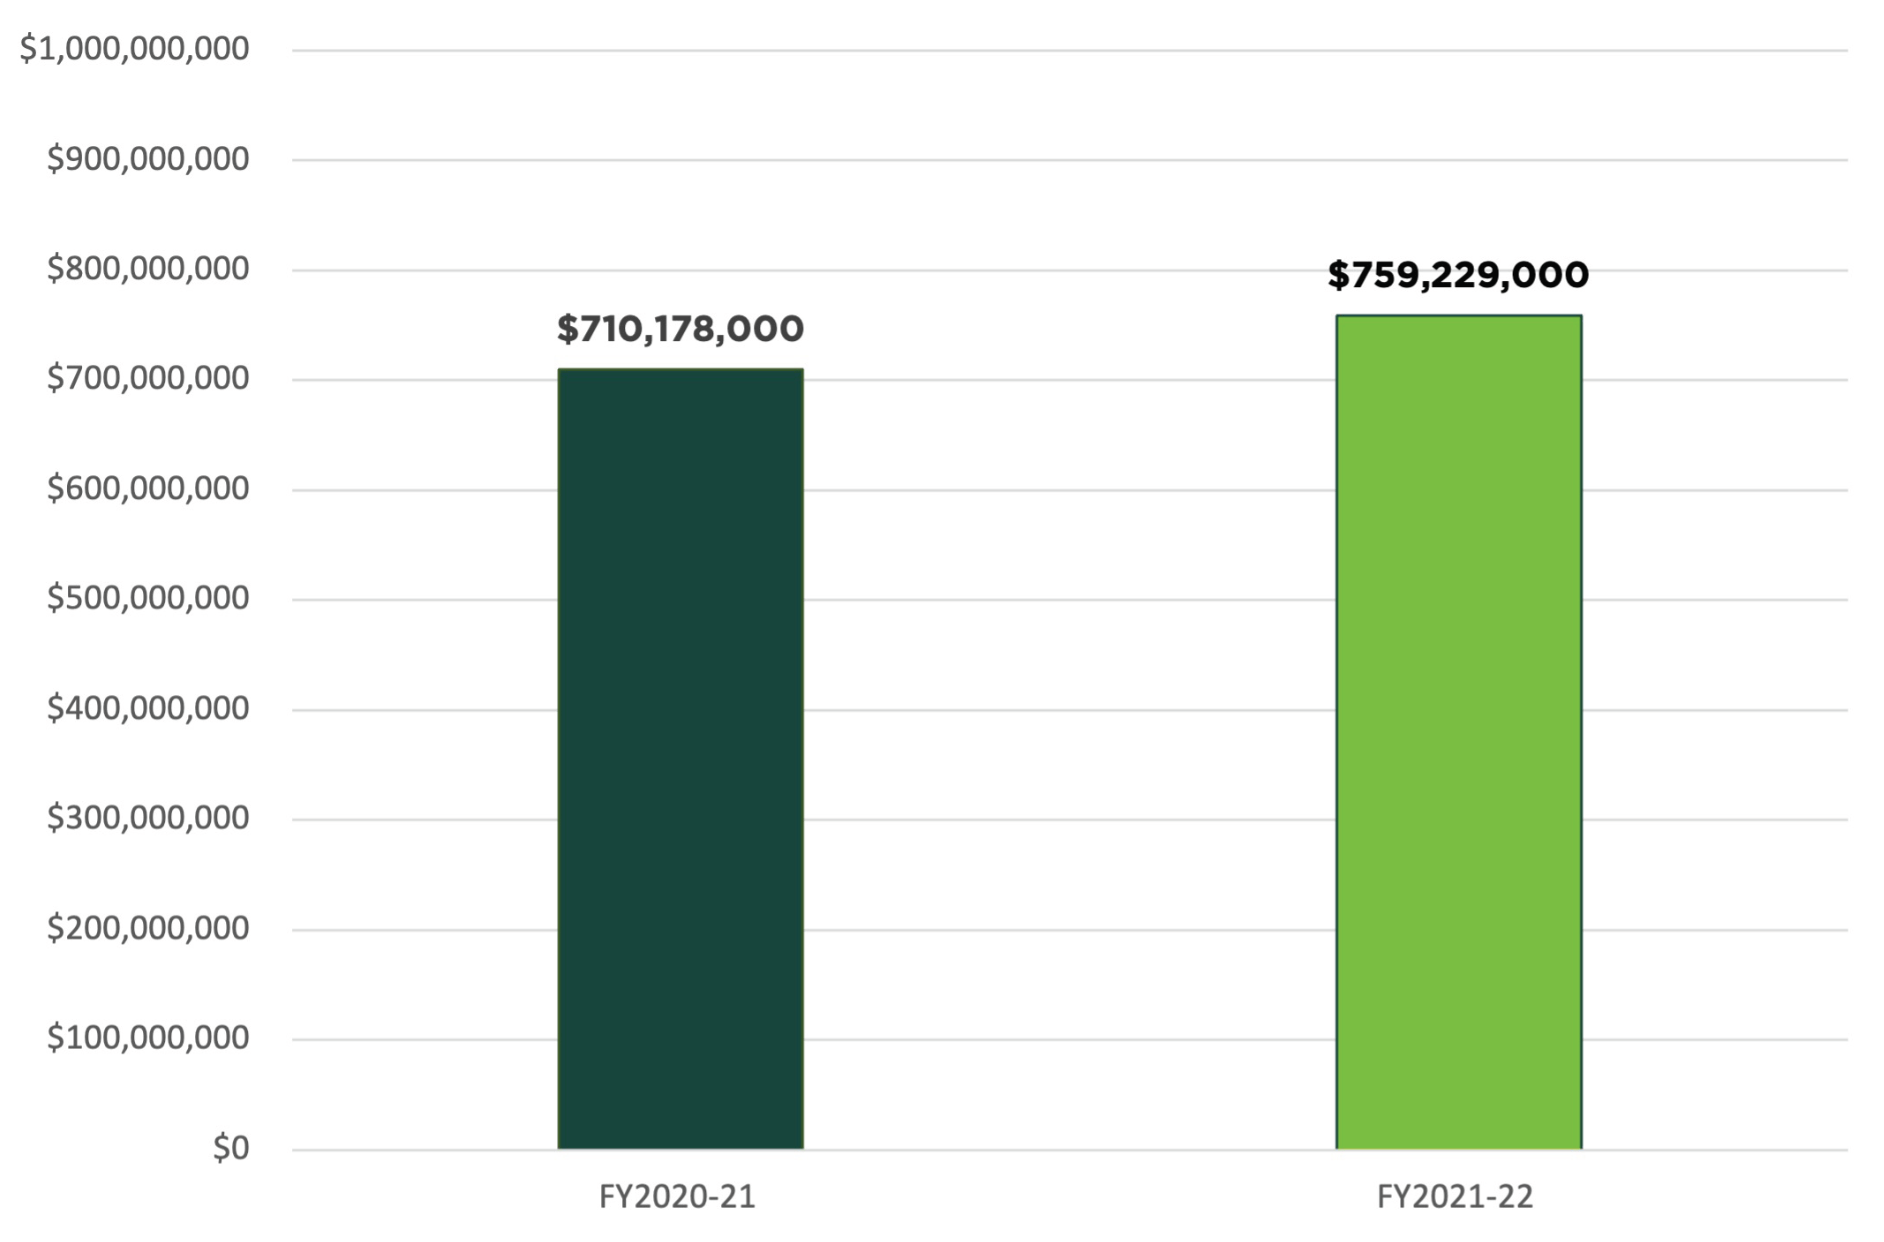 Bar graph showing $710,178,000 annual research expenditures in FY2020-21 and $759,229,000 in FY2021-22.